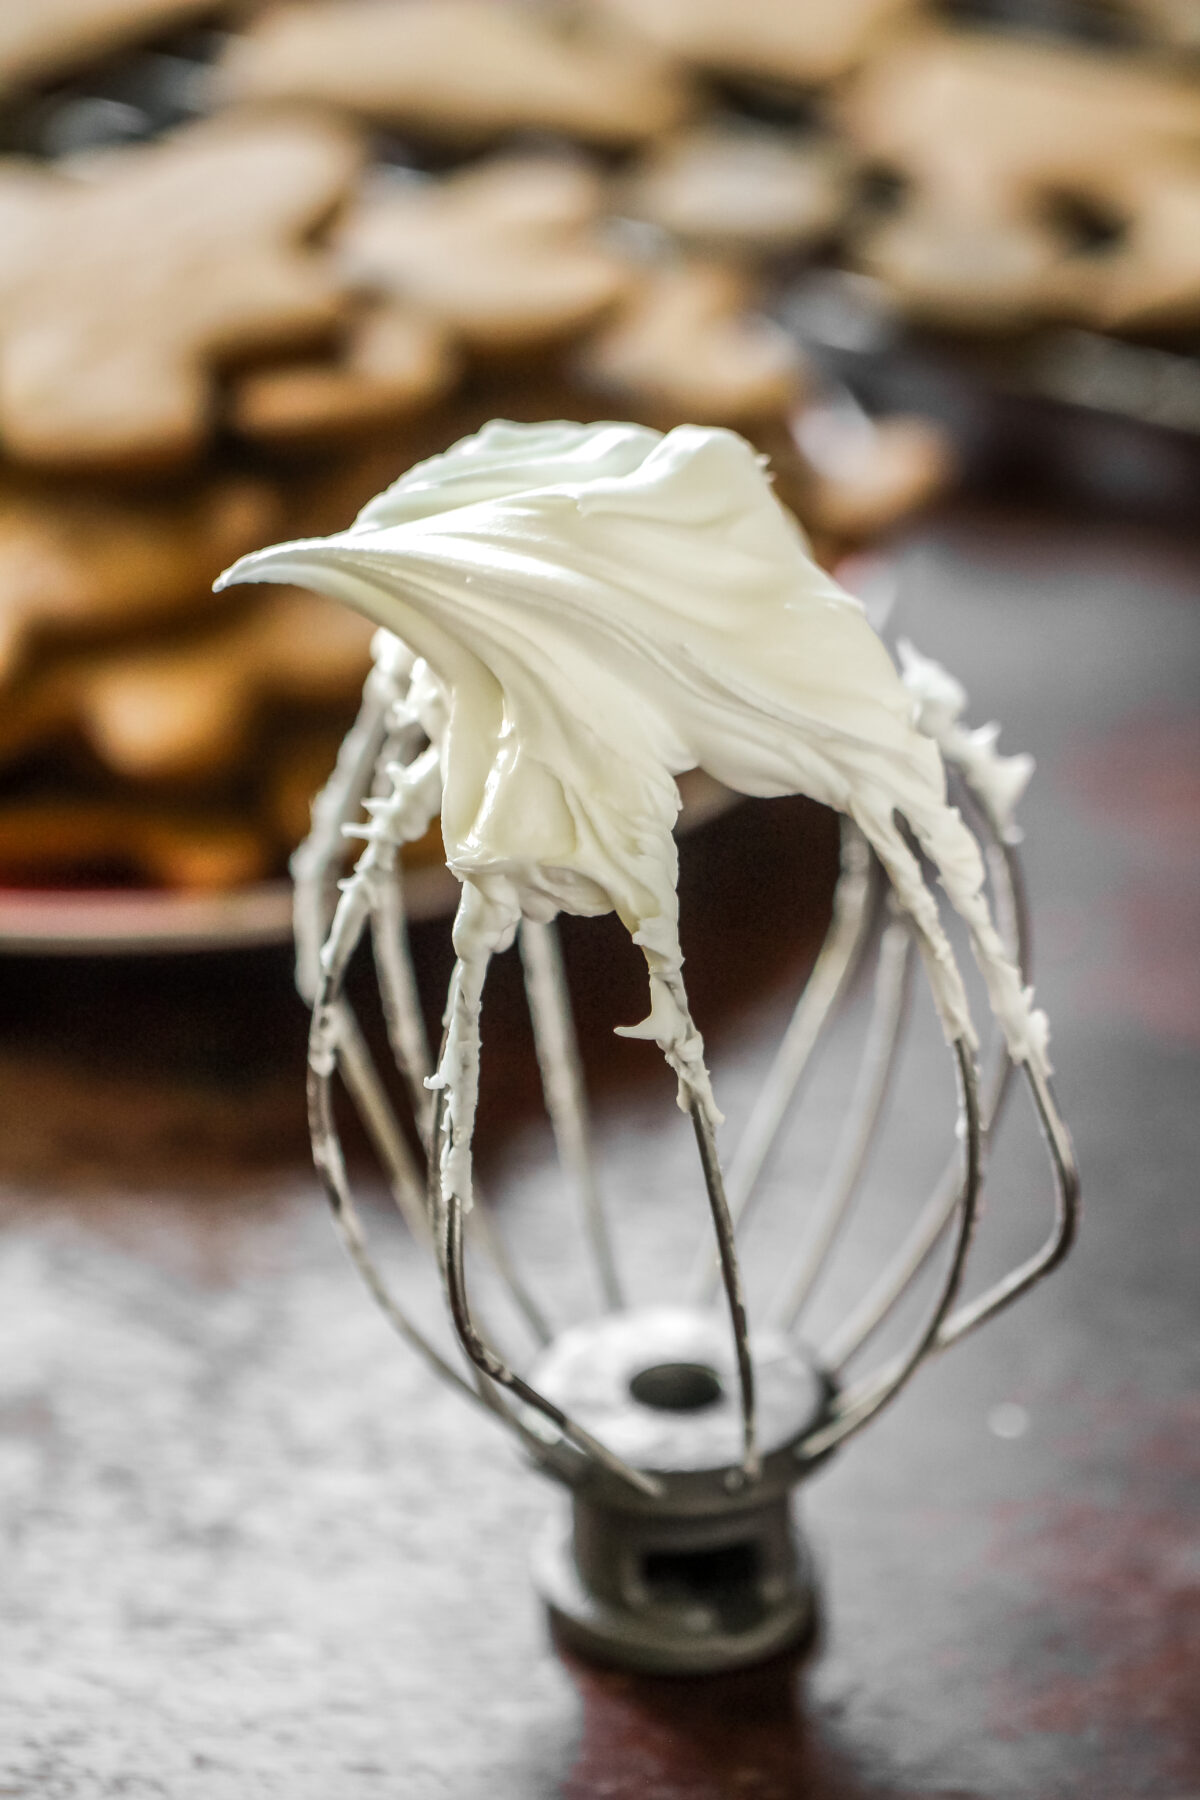 Royal icing on a stand mixer whisk attatchment.